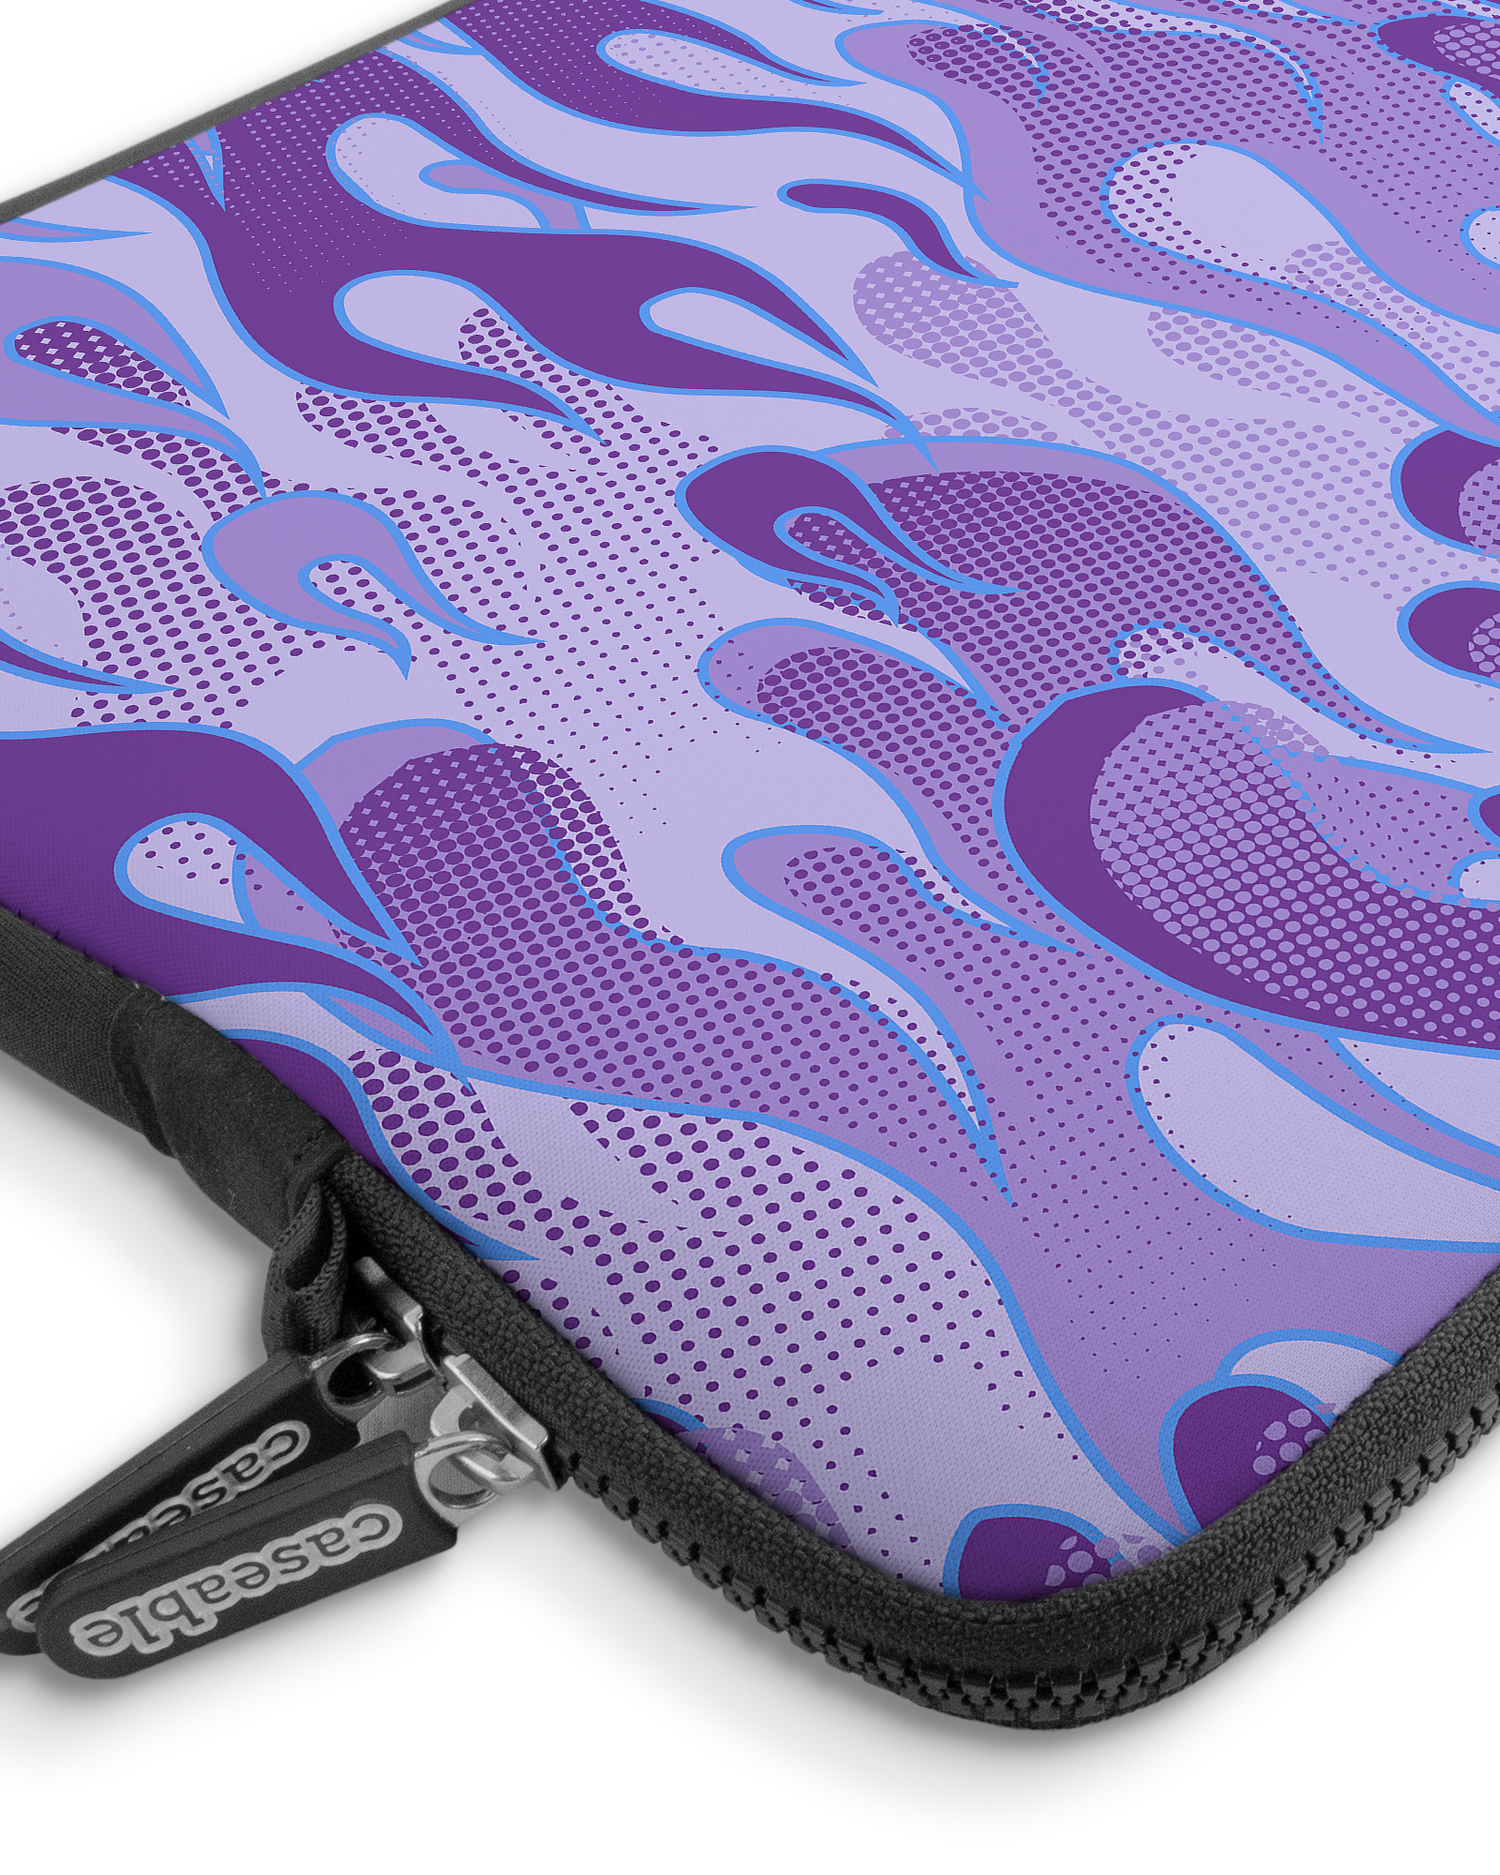 Purple Flames Premium Laptop Bag 13-14 inch with device inside